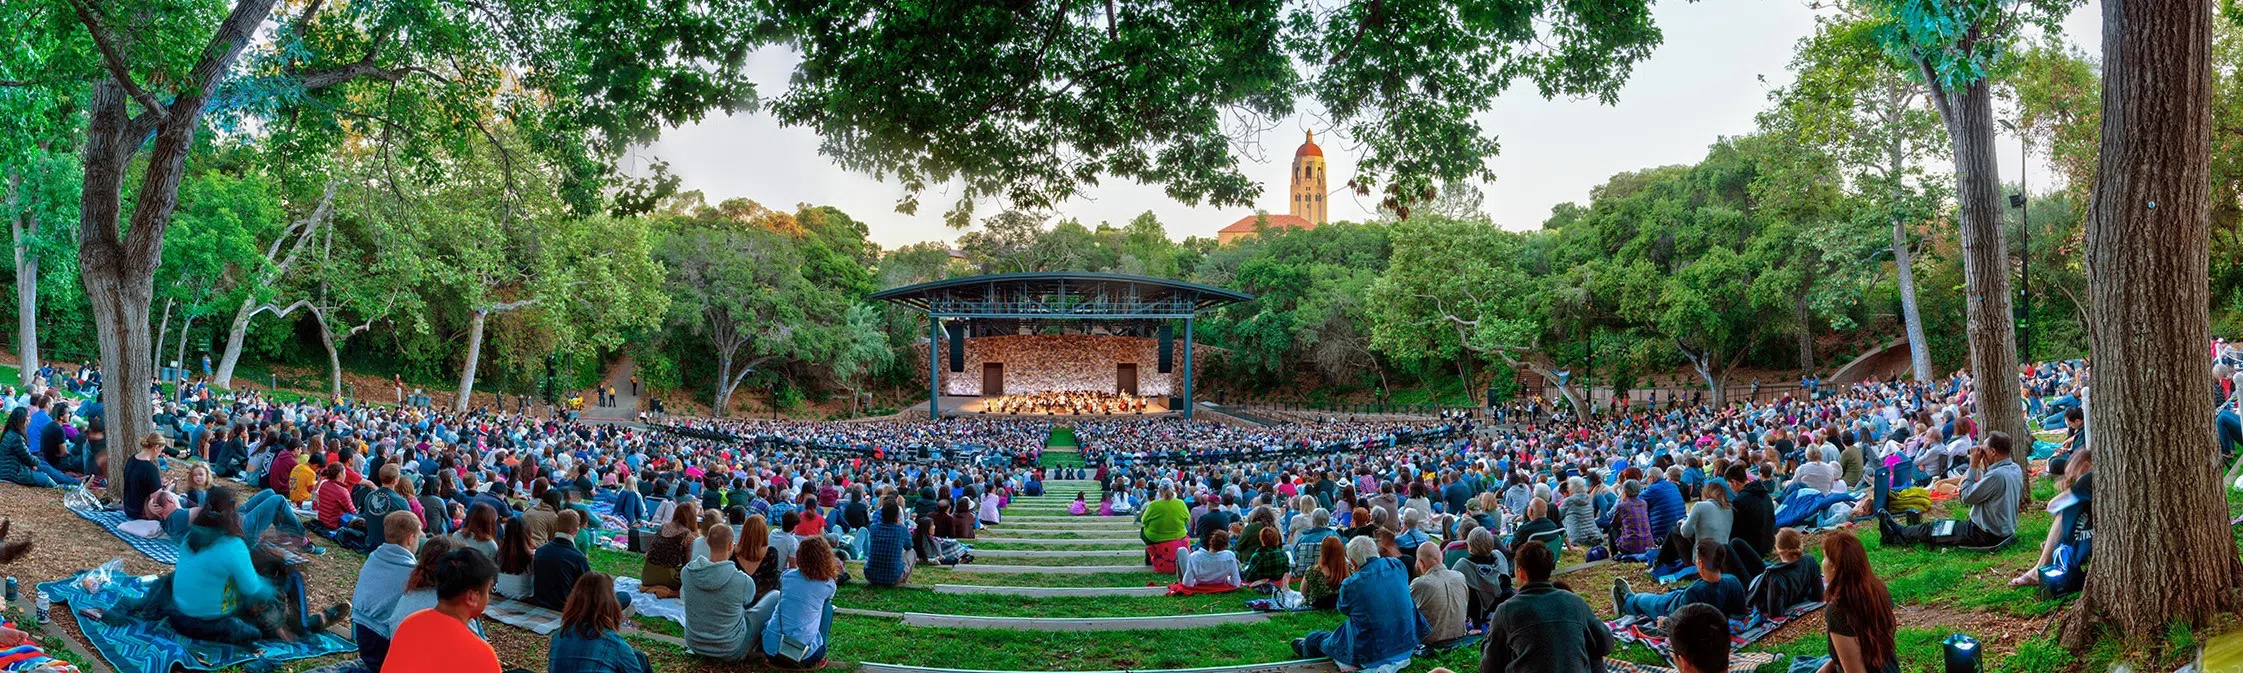 Hundreds of people seated on terraced lawns leading down to a modern covered stage in a tree-lined amphitheater